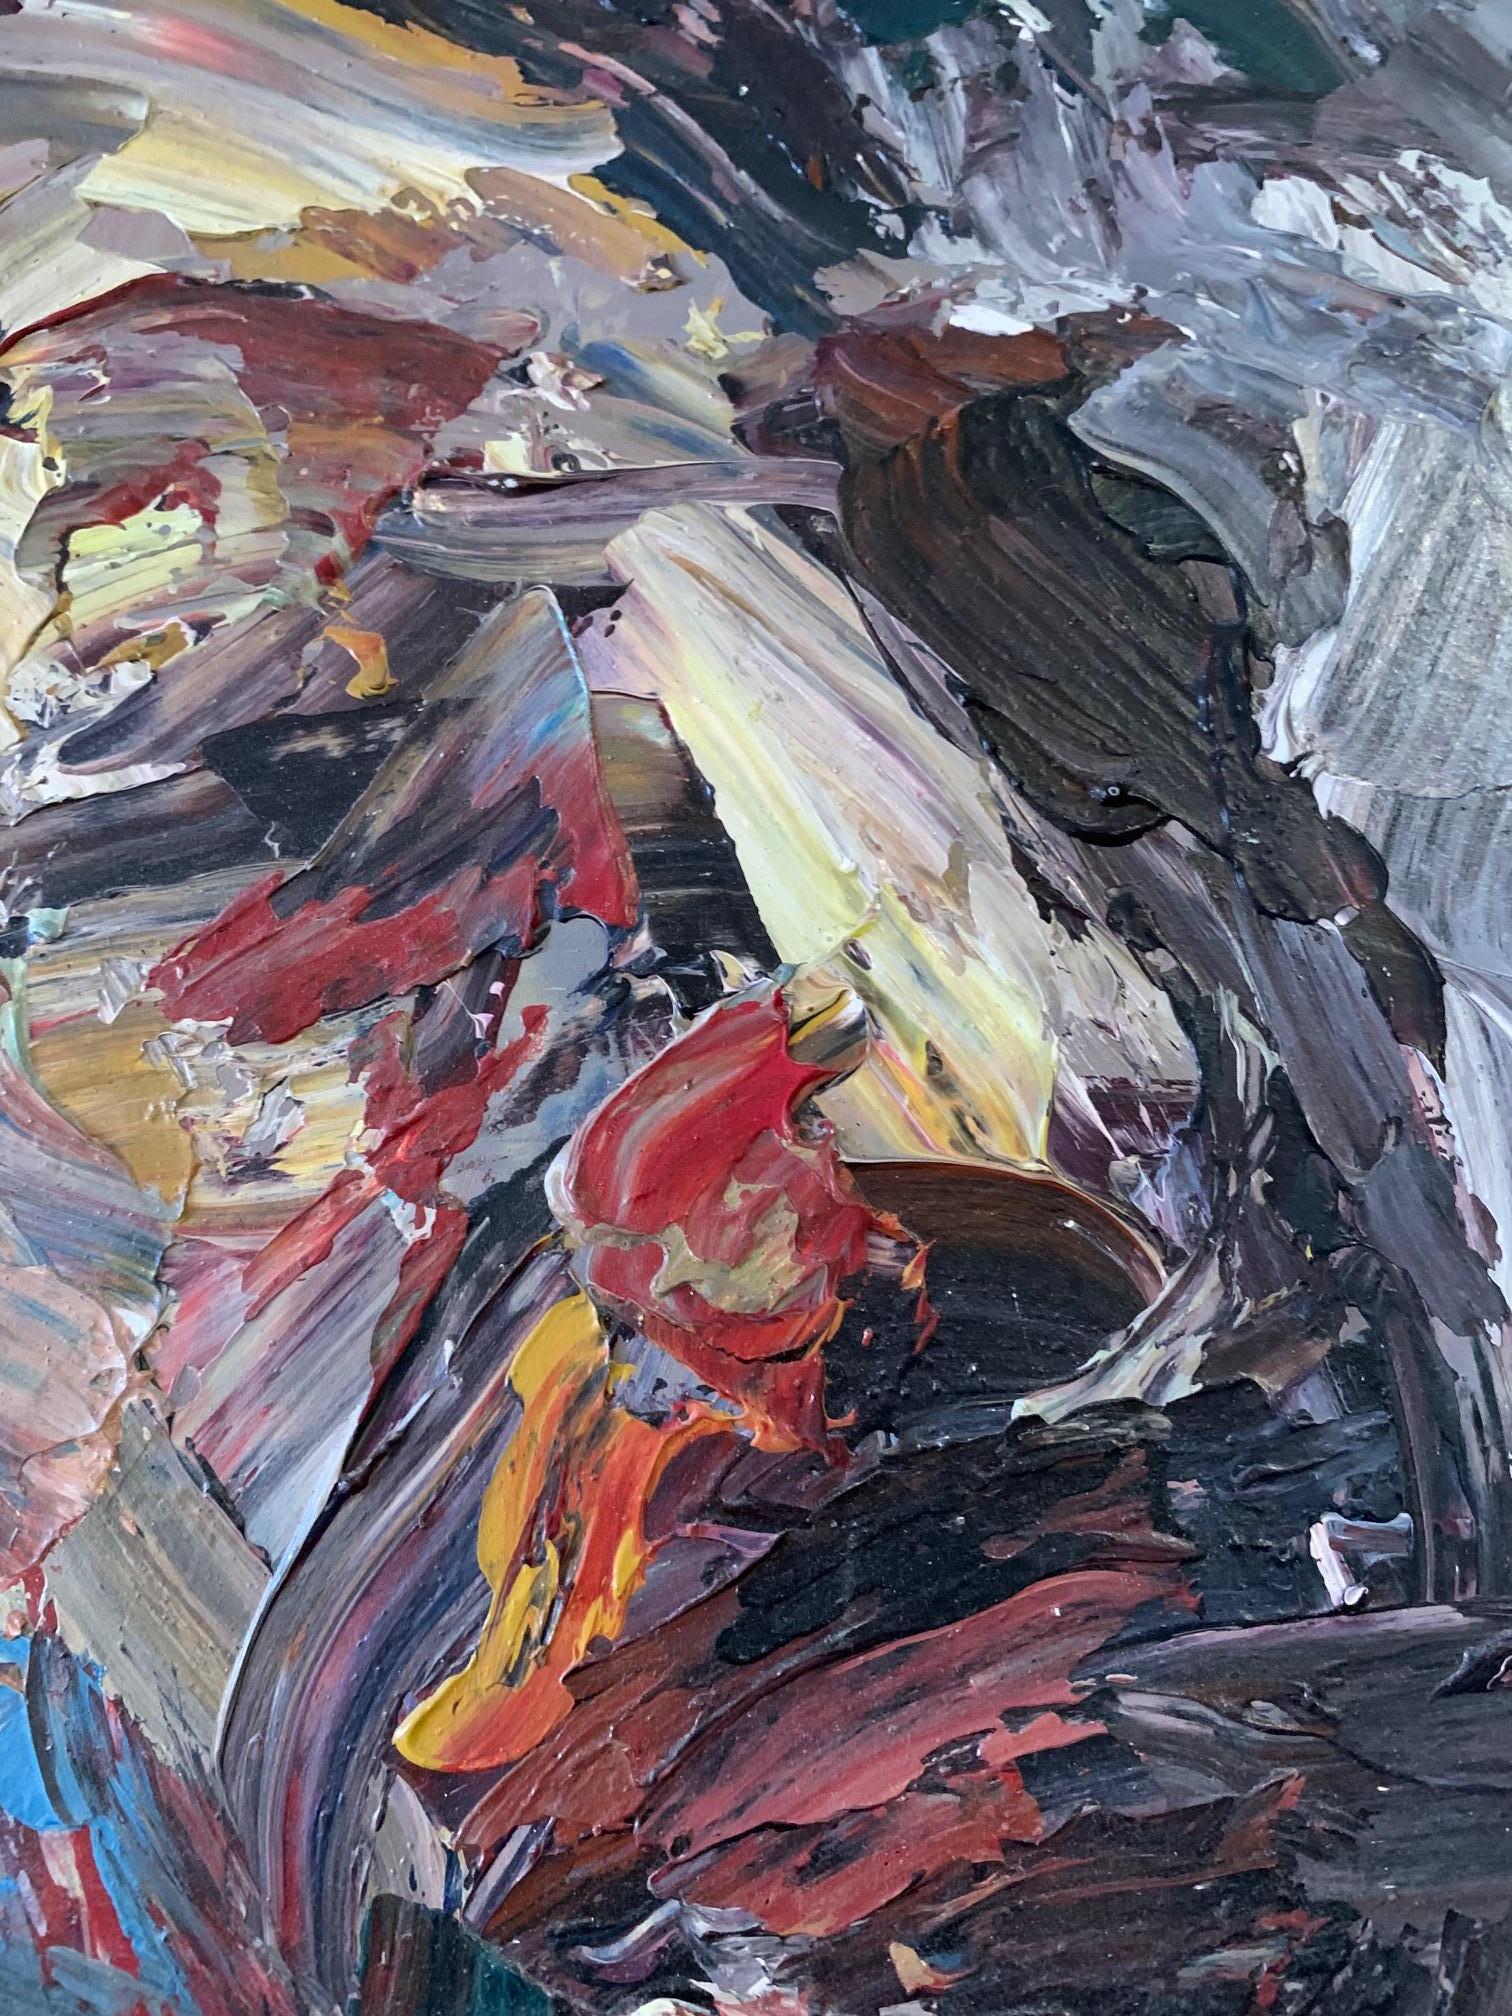 Untitled' Contemporary Abstract Expressionist Portrait by Masri - Painting de Masri Hayssam